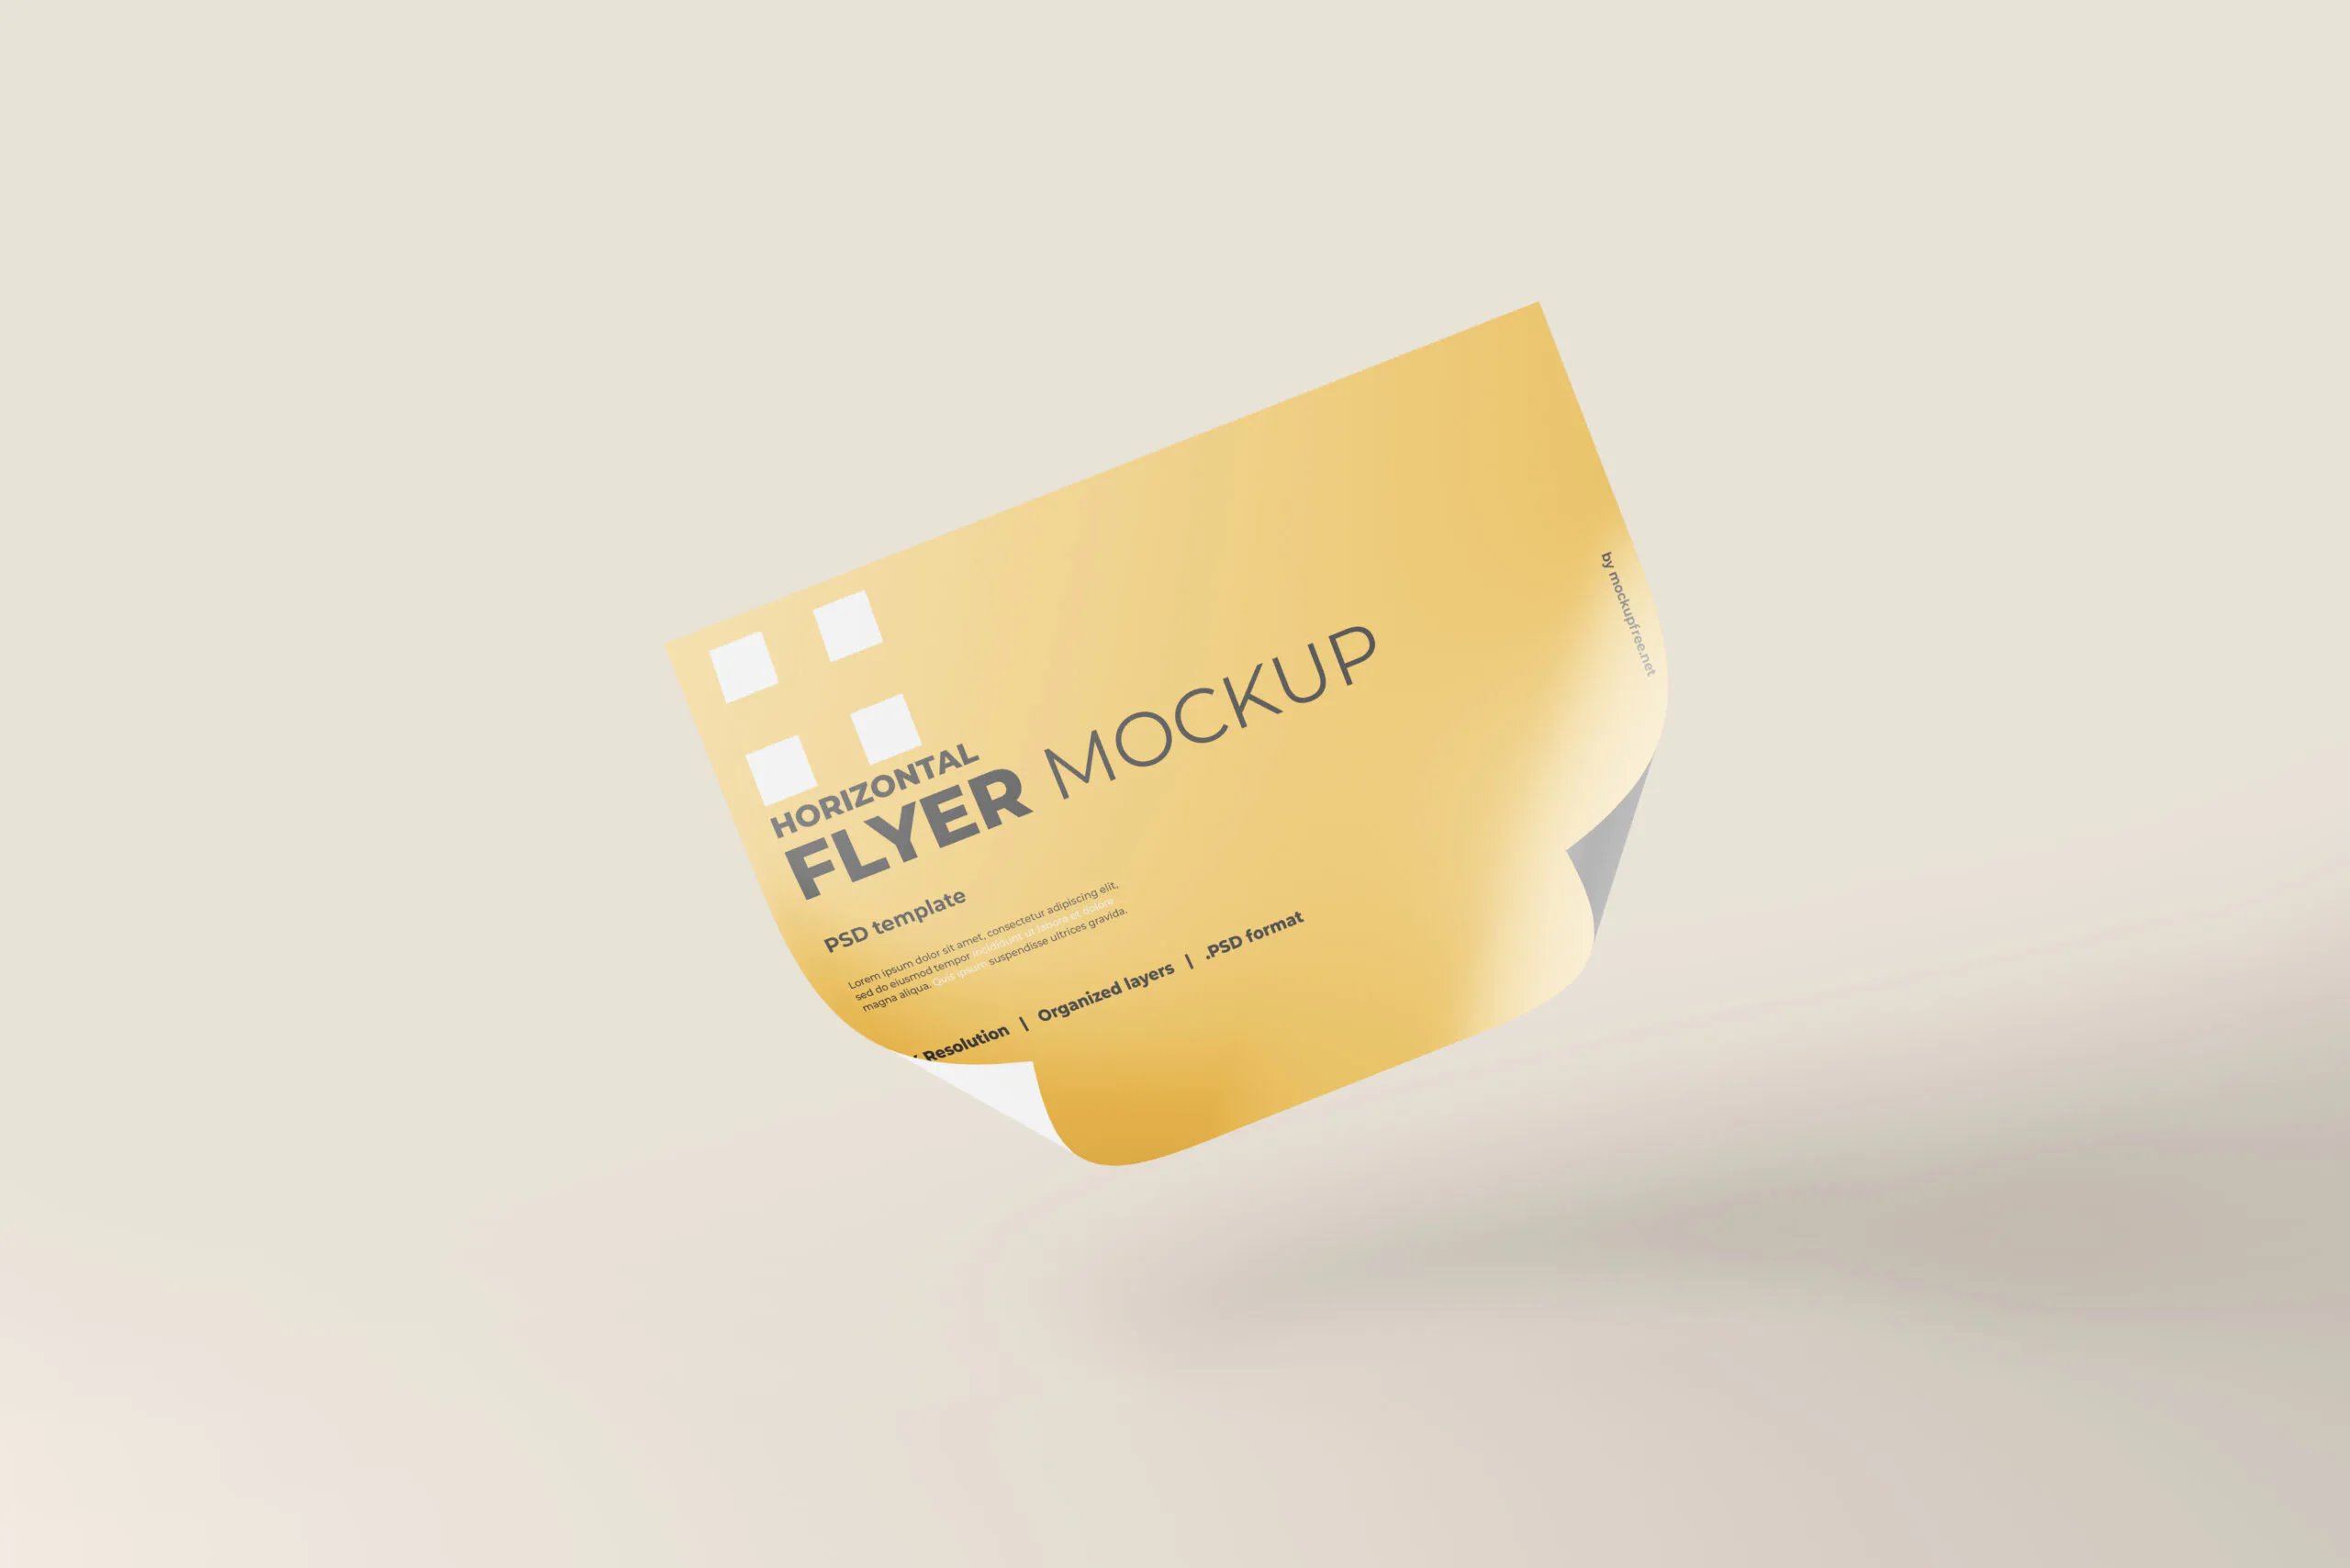 6 Horizontal A4 Flyer Mockups in Front and Perspective Views FREE PSD